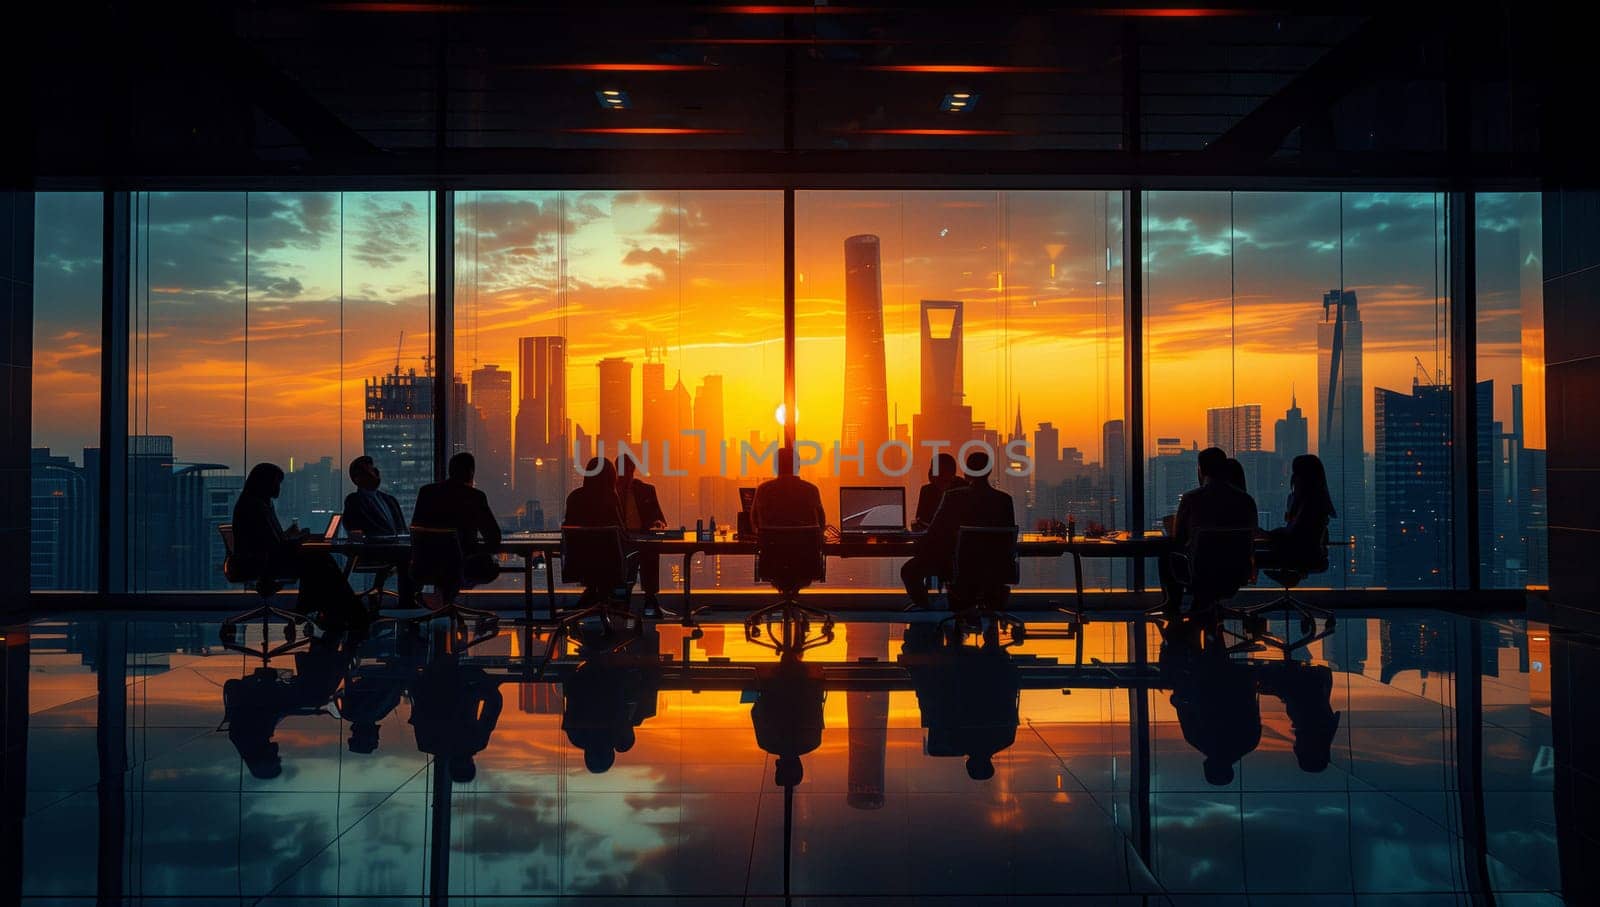 Group at table by window, city silhouette under sunset sky by richwolf